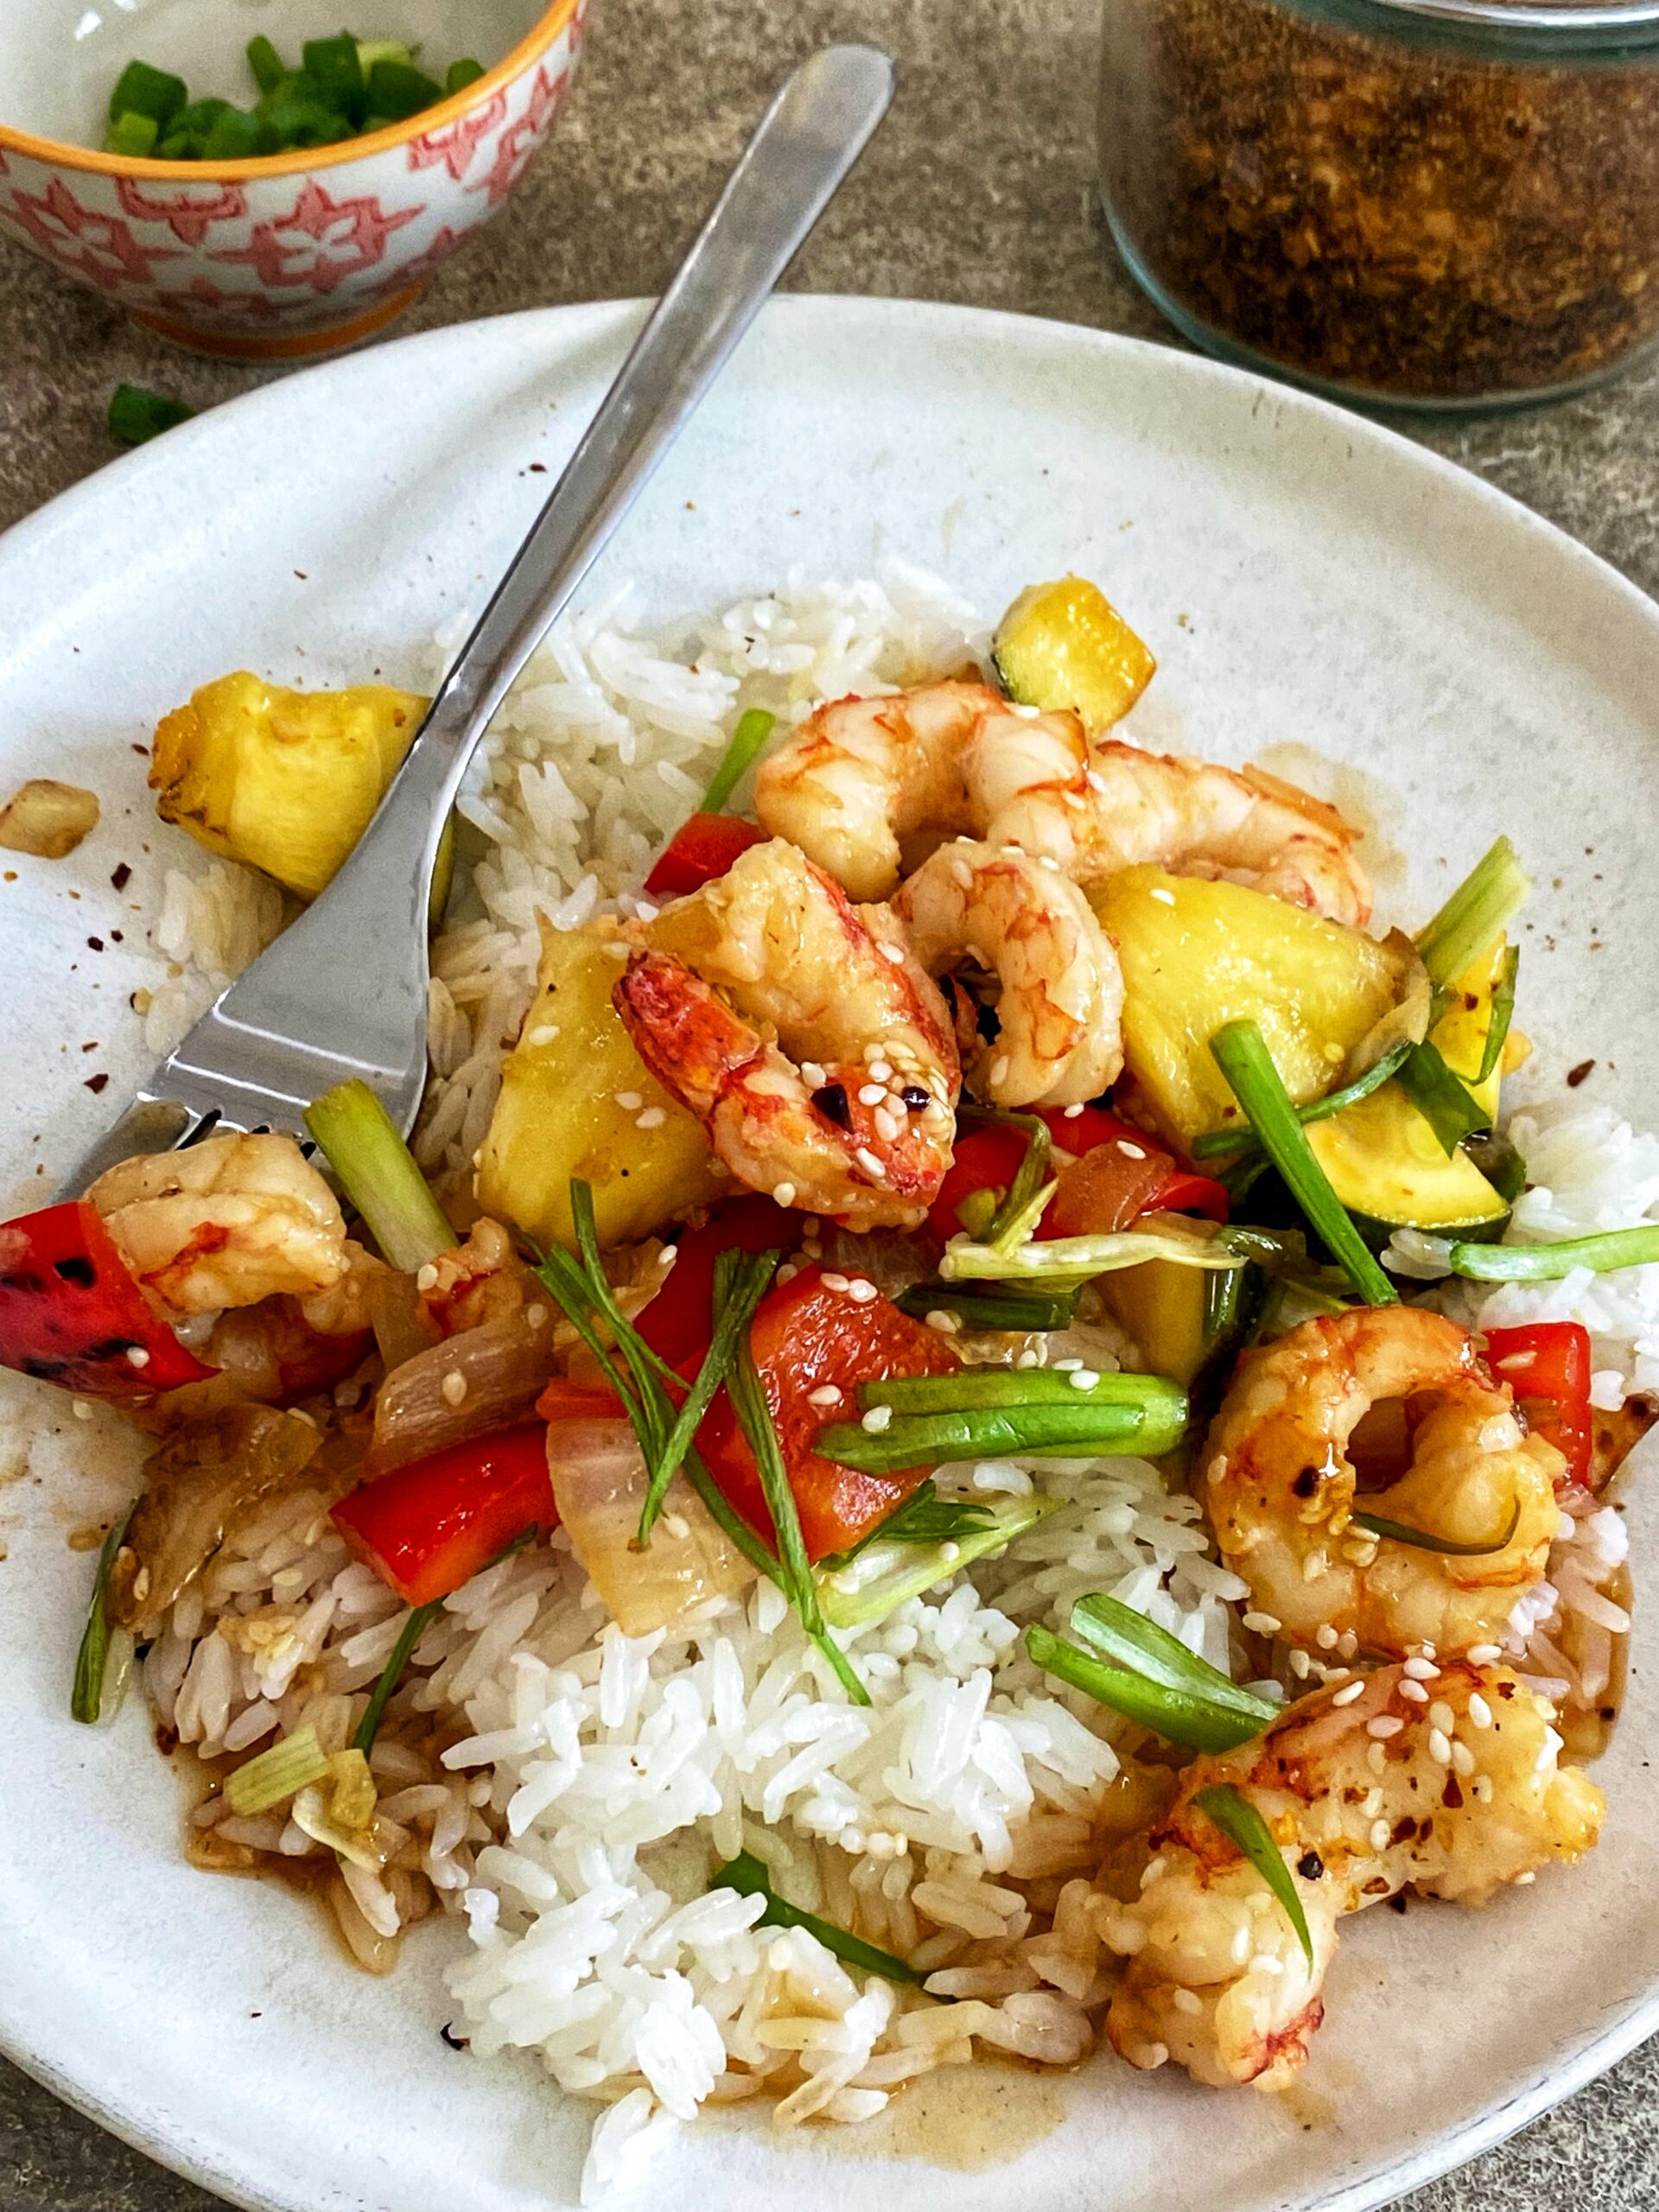 A plate of food with shrimp and rice.